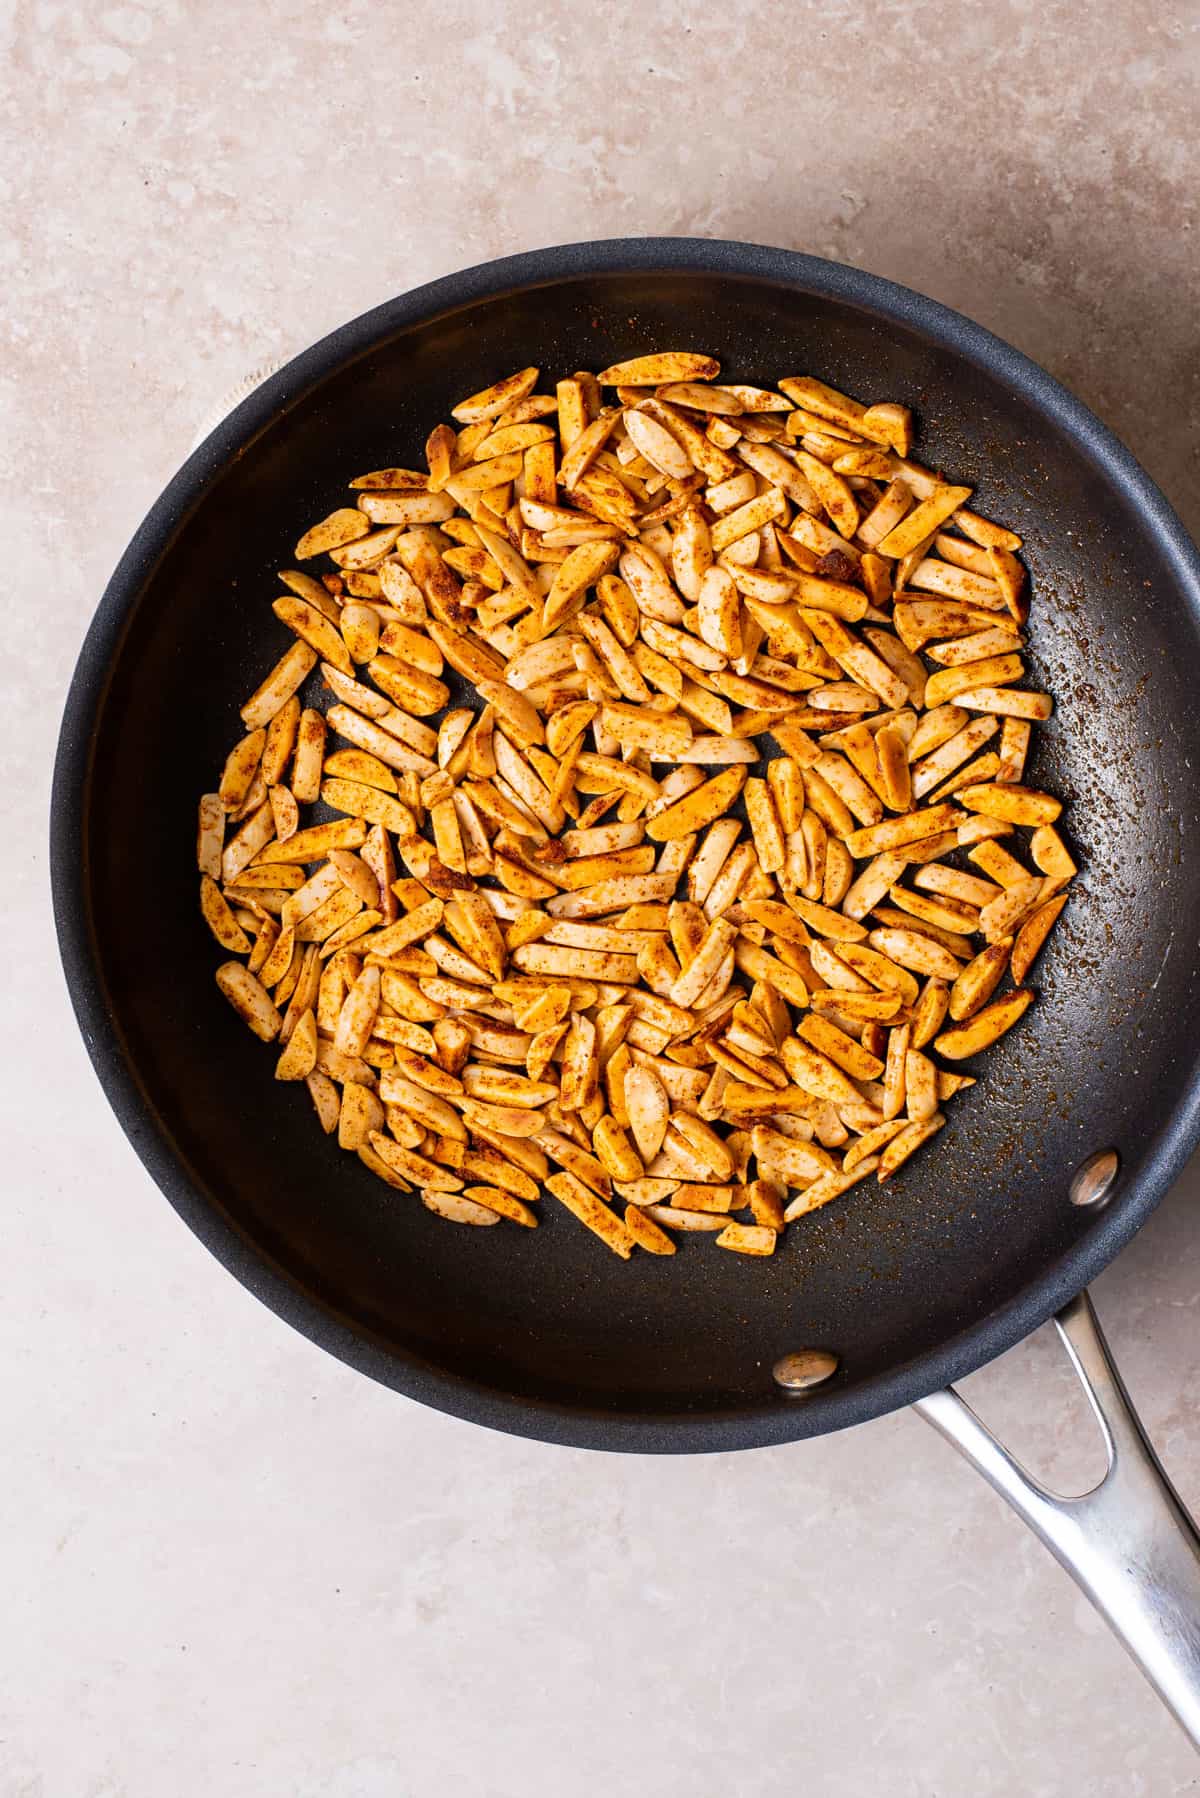 Spiced toasted slivered almonds in a small skillet.